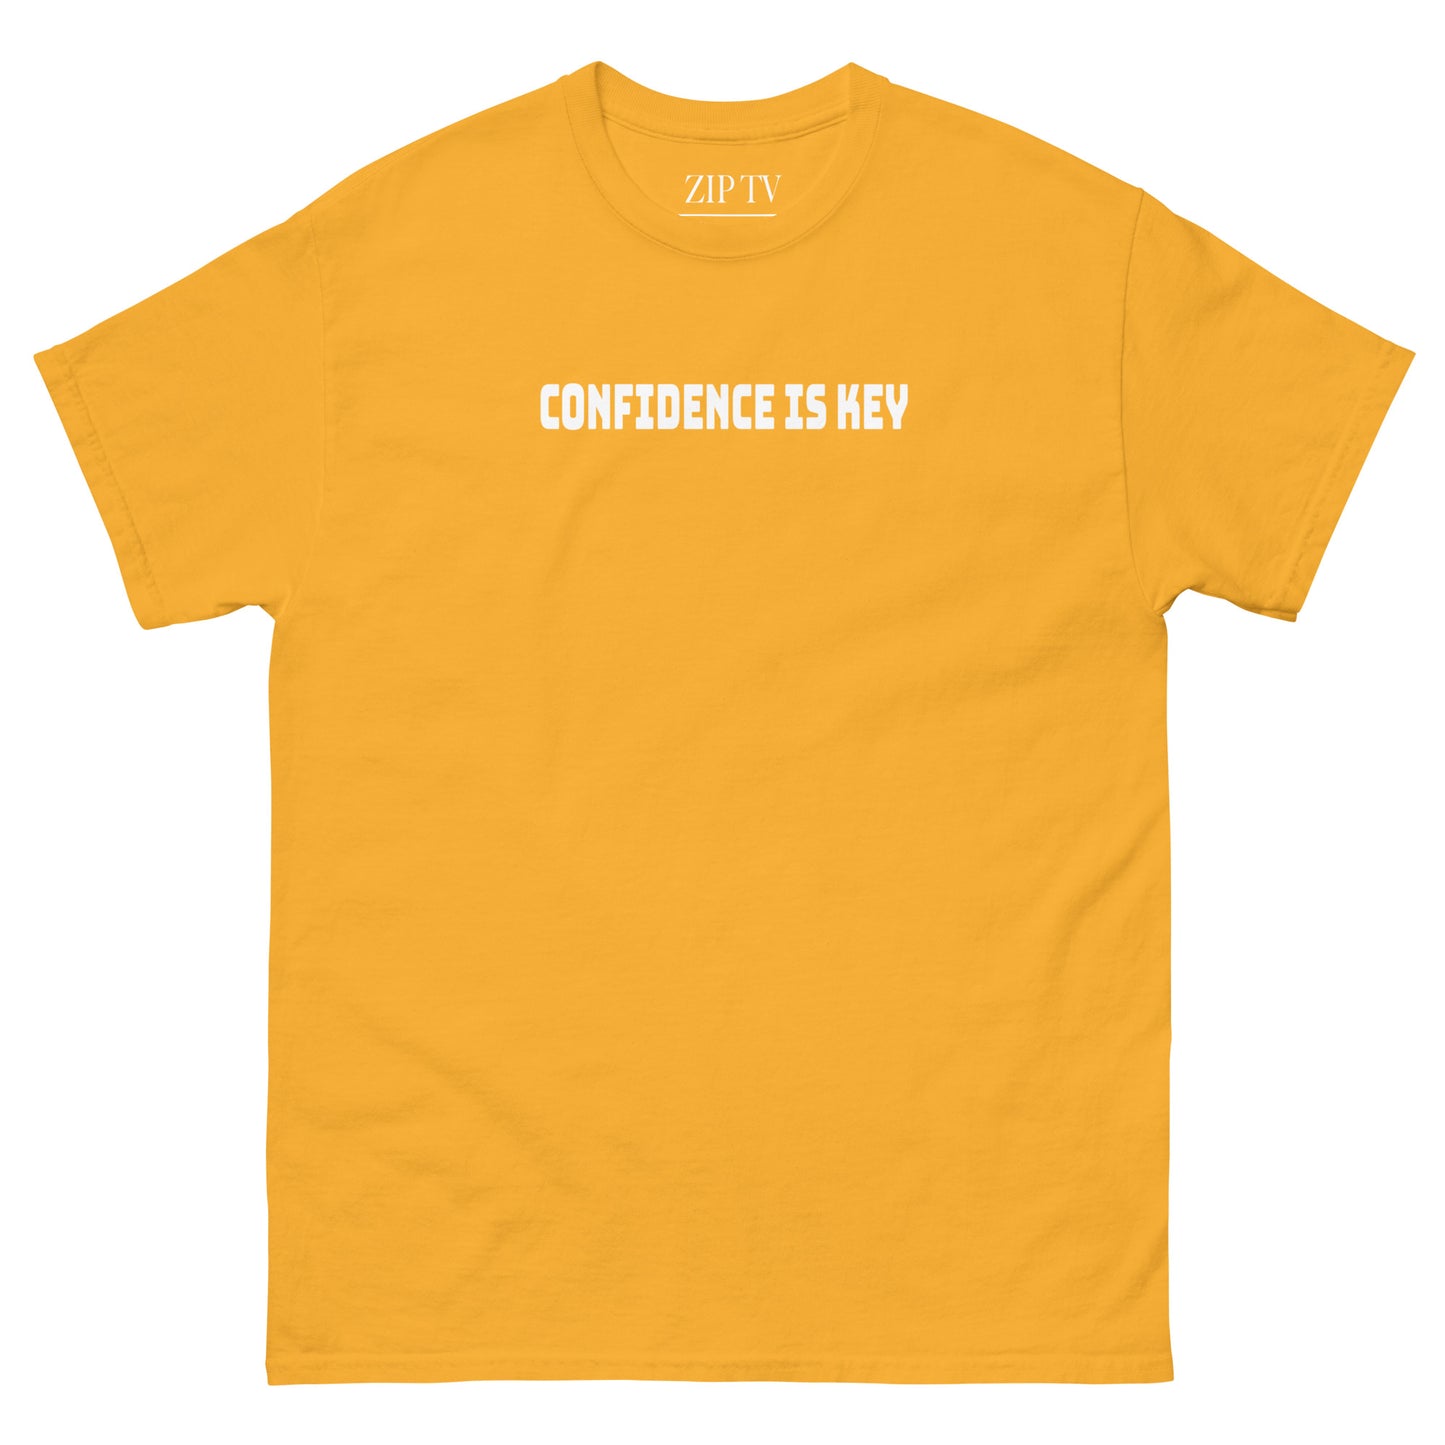 "Confidence is Key" T-Shirt w/ White Lettering